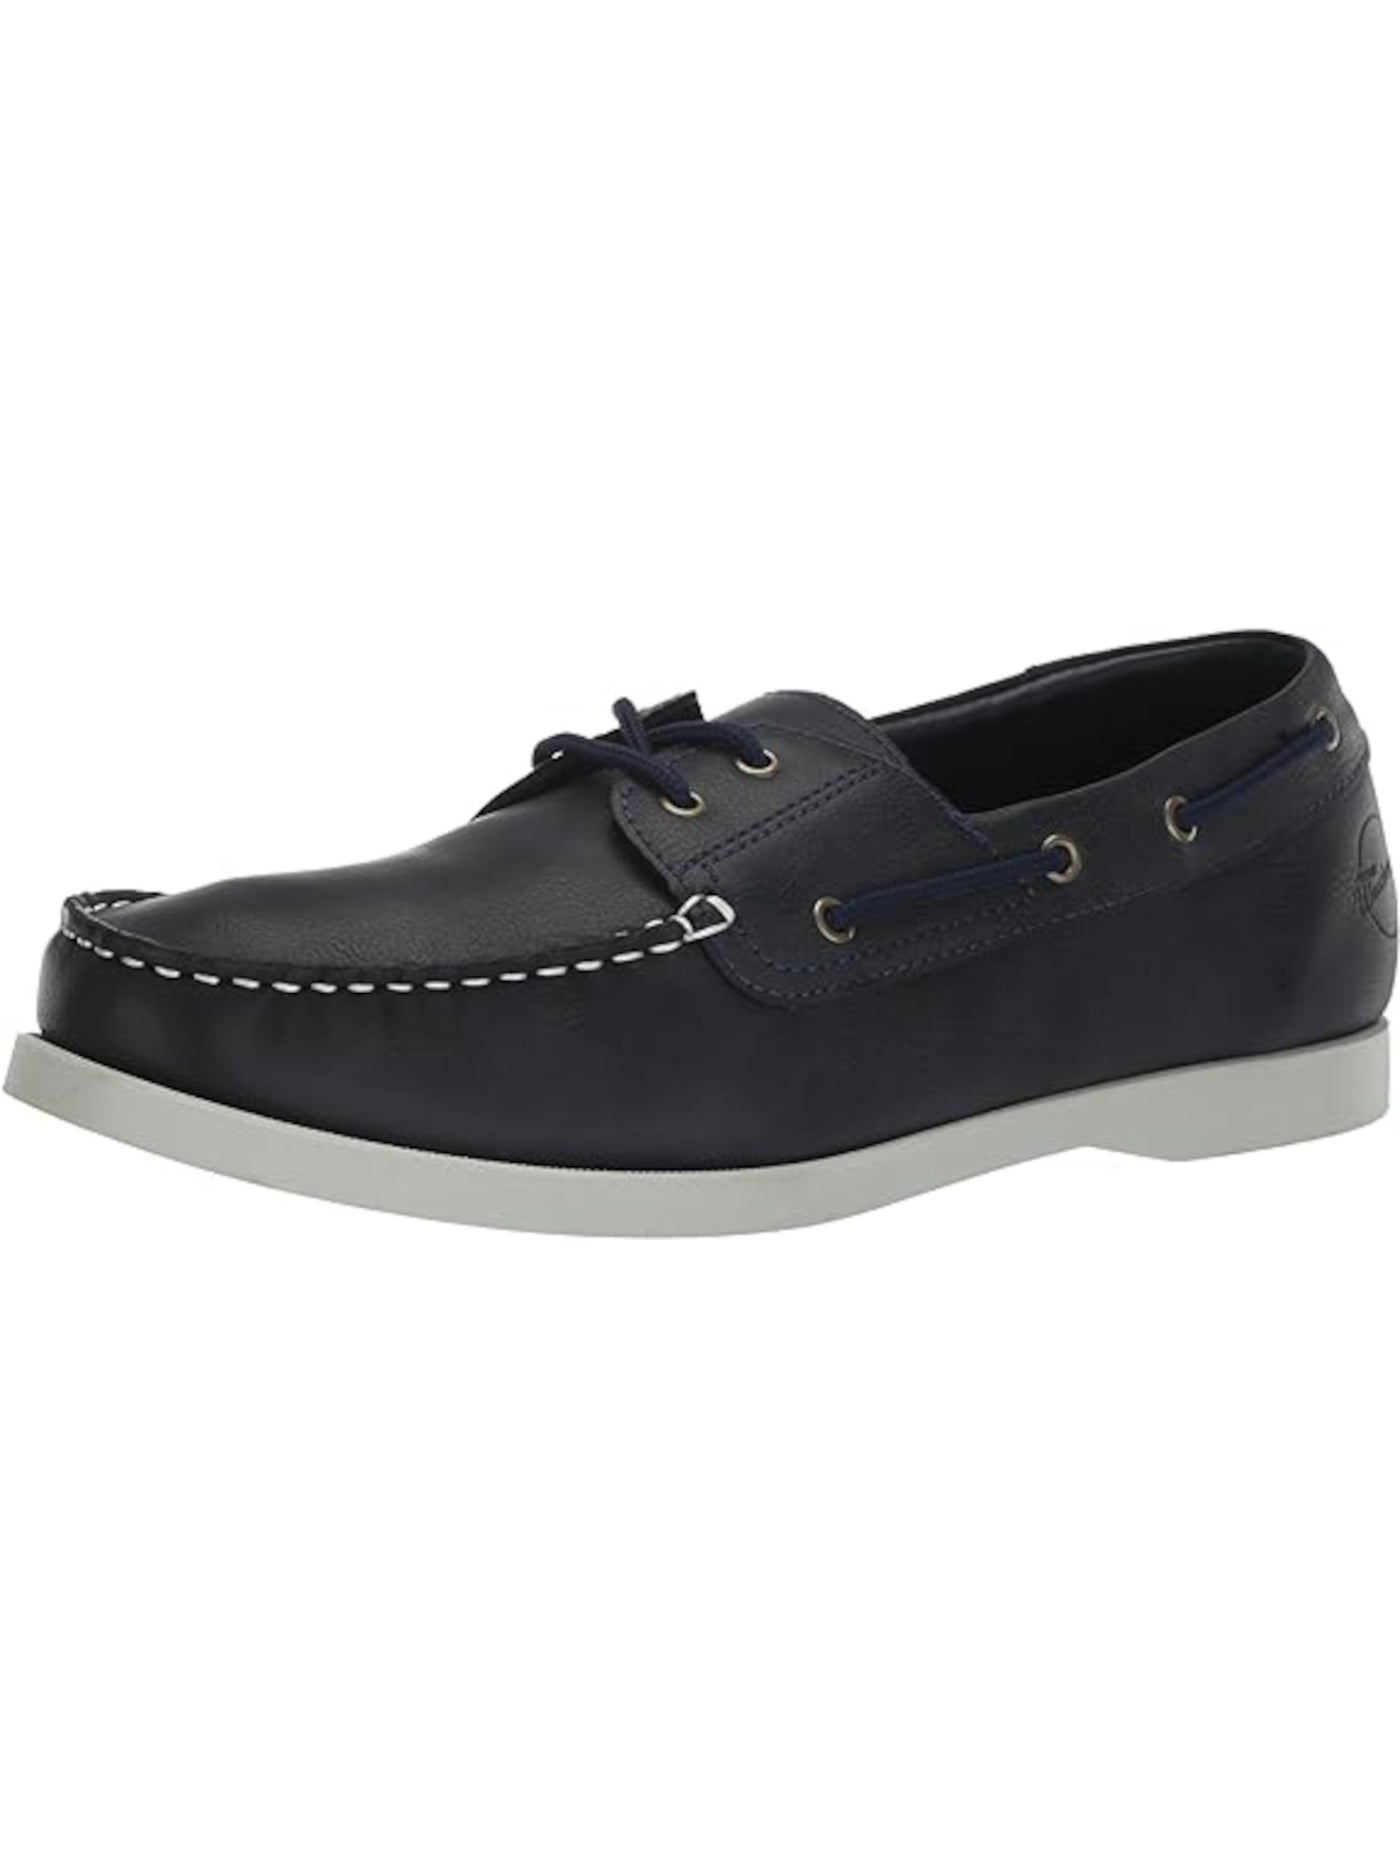 WEATHERPROOF VINTAGE Mens Navy Cushioned Benny Round Toe Lace-Up Boat Shoes 11.5 M